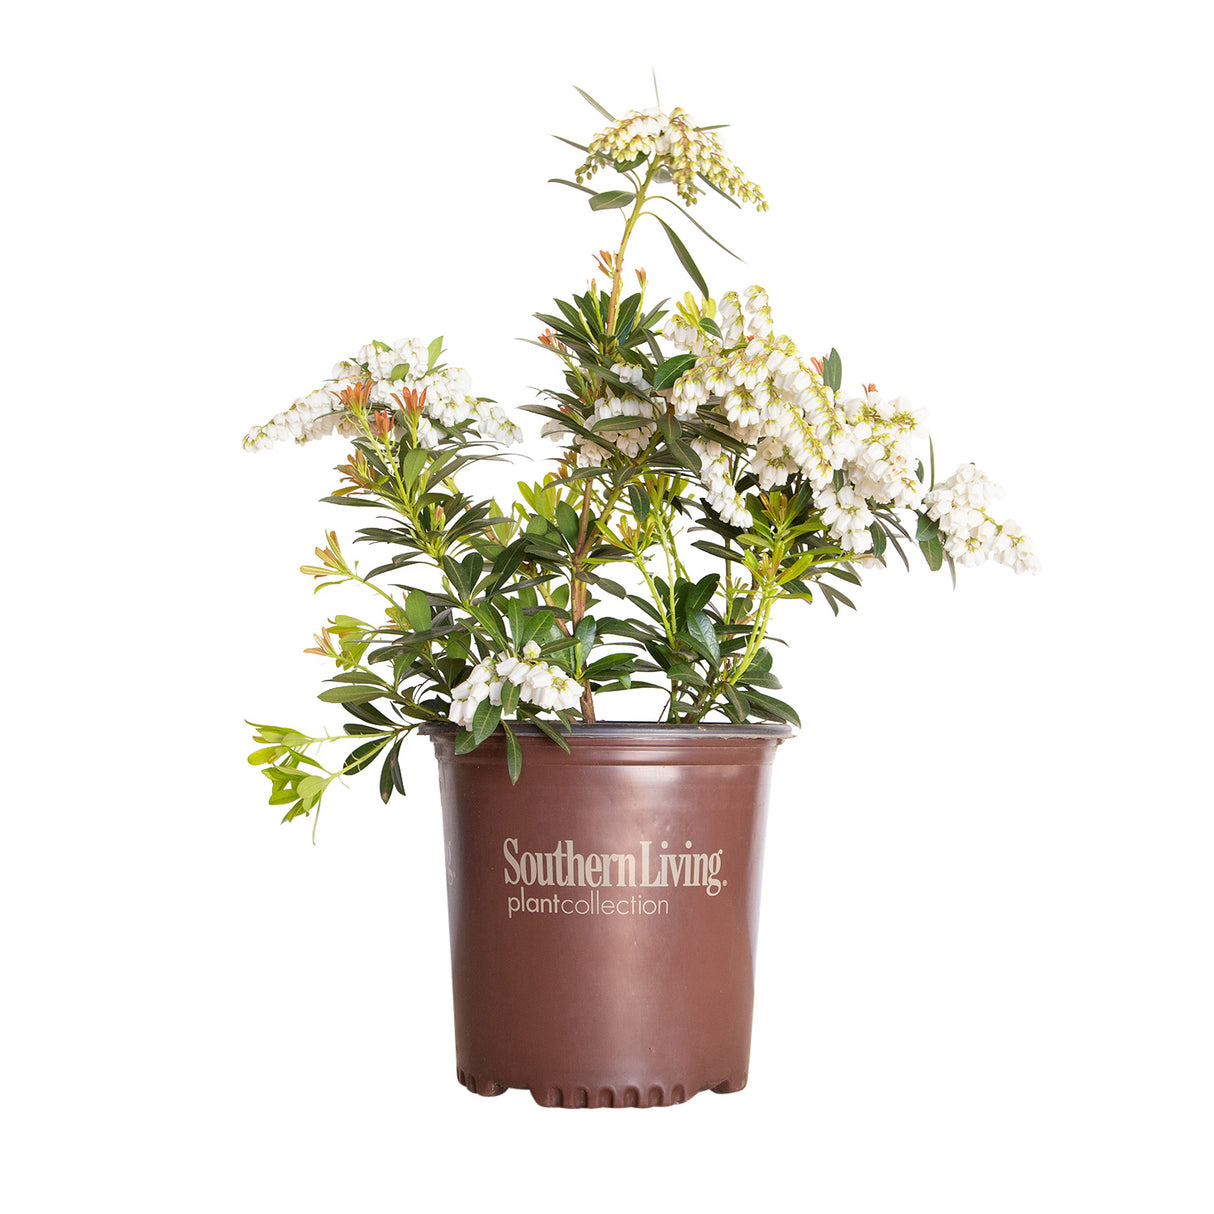 mountain snow pieris for sale with flower flowers and southern living plants pot on a white background